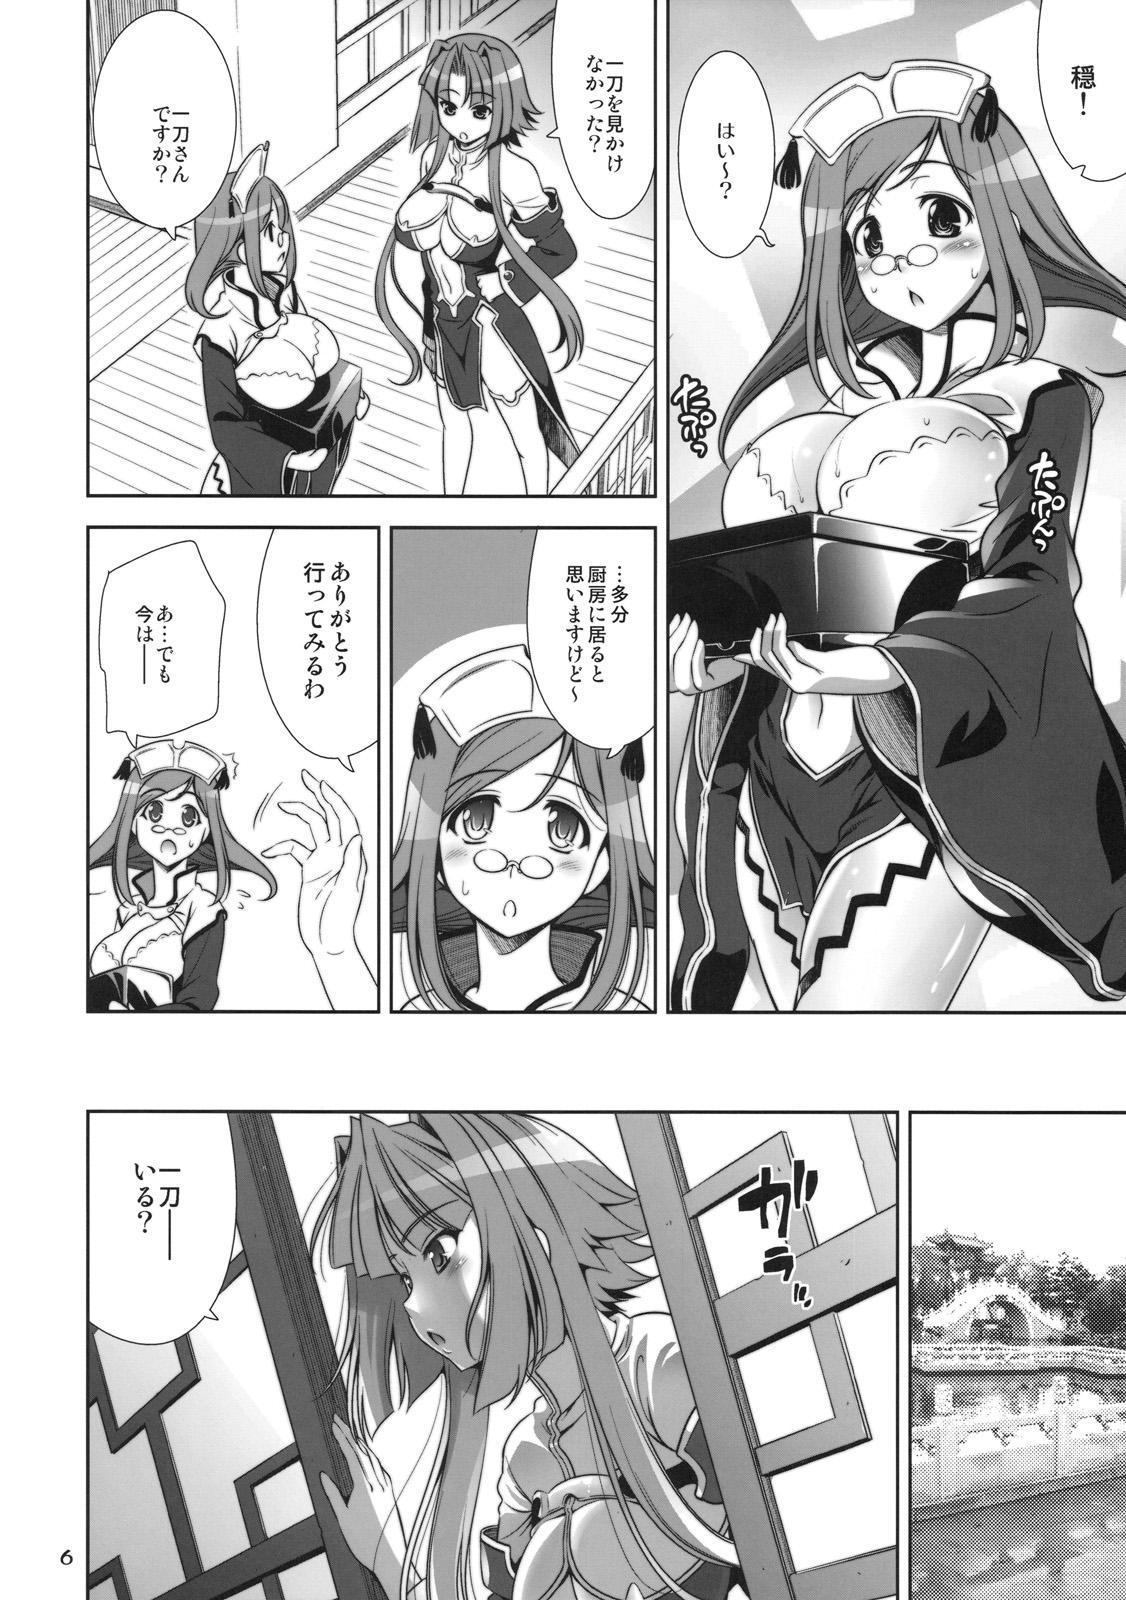 Humiliation Go! My Way - Koihime musou Whipping - Page 5